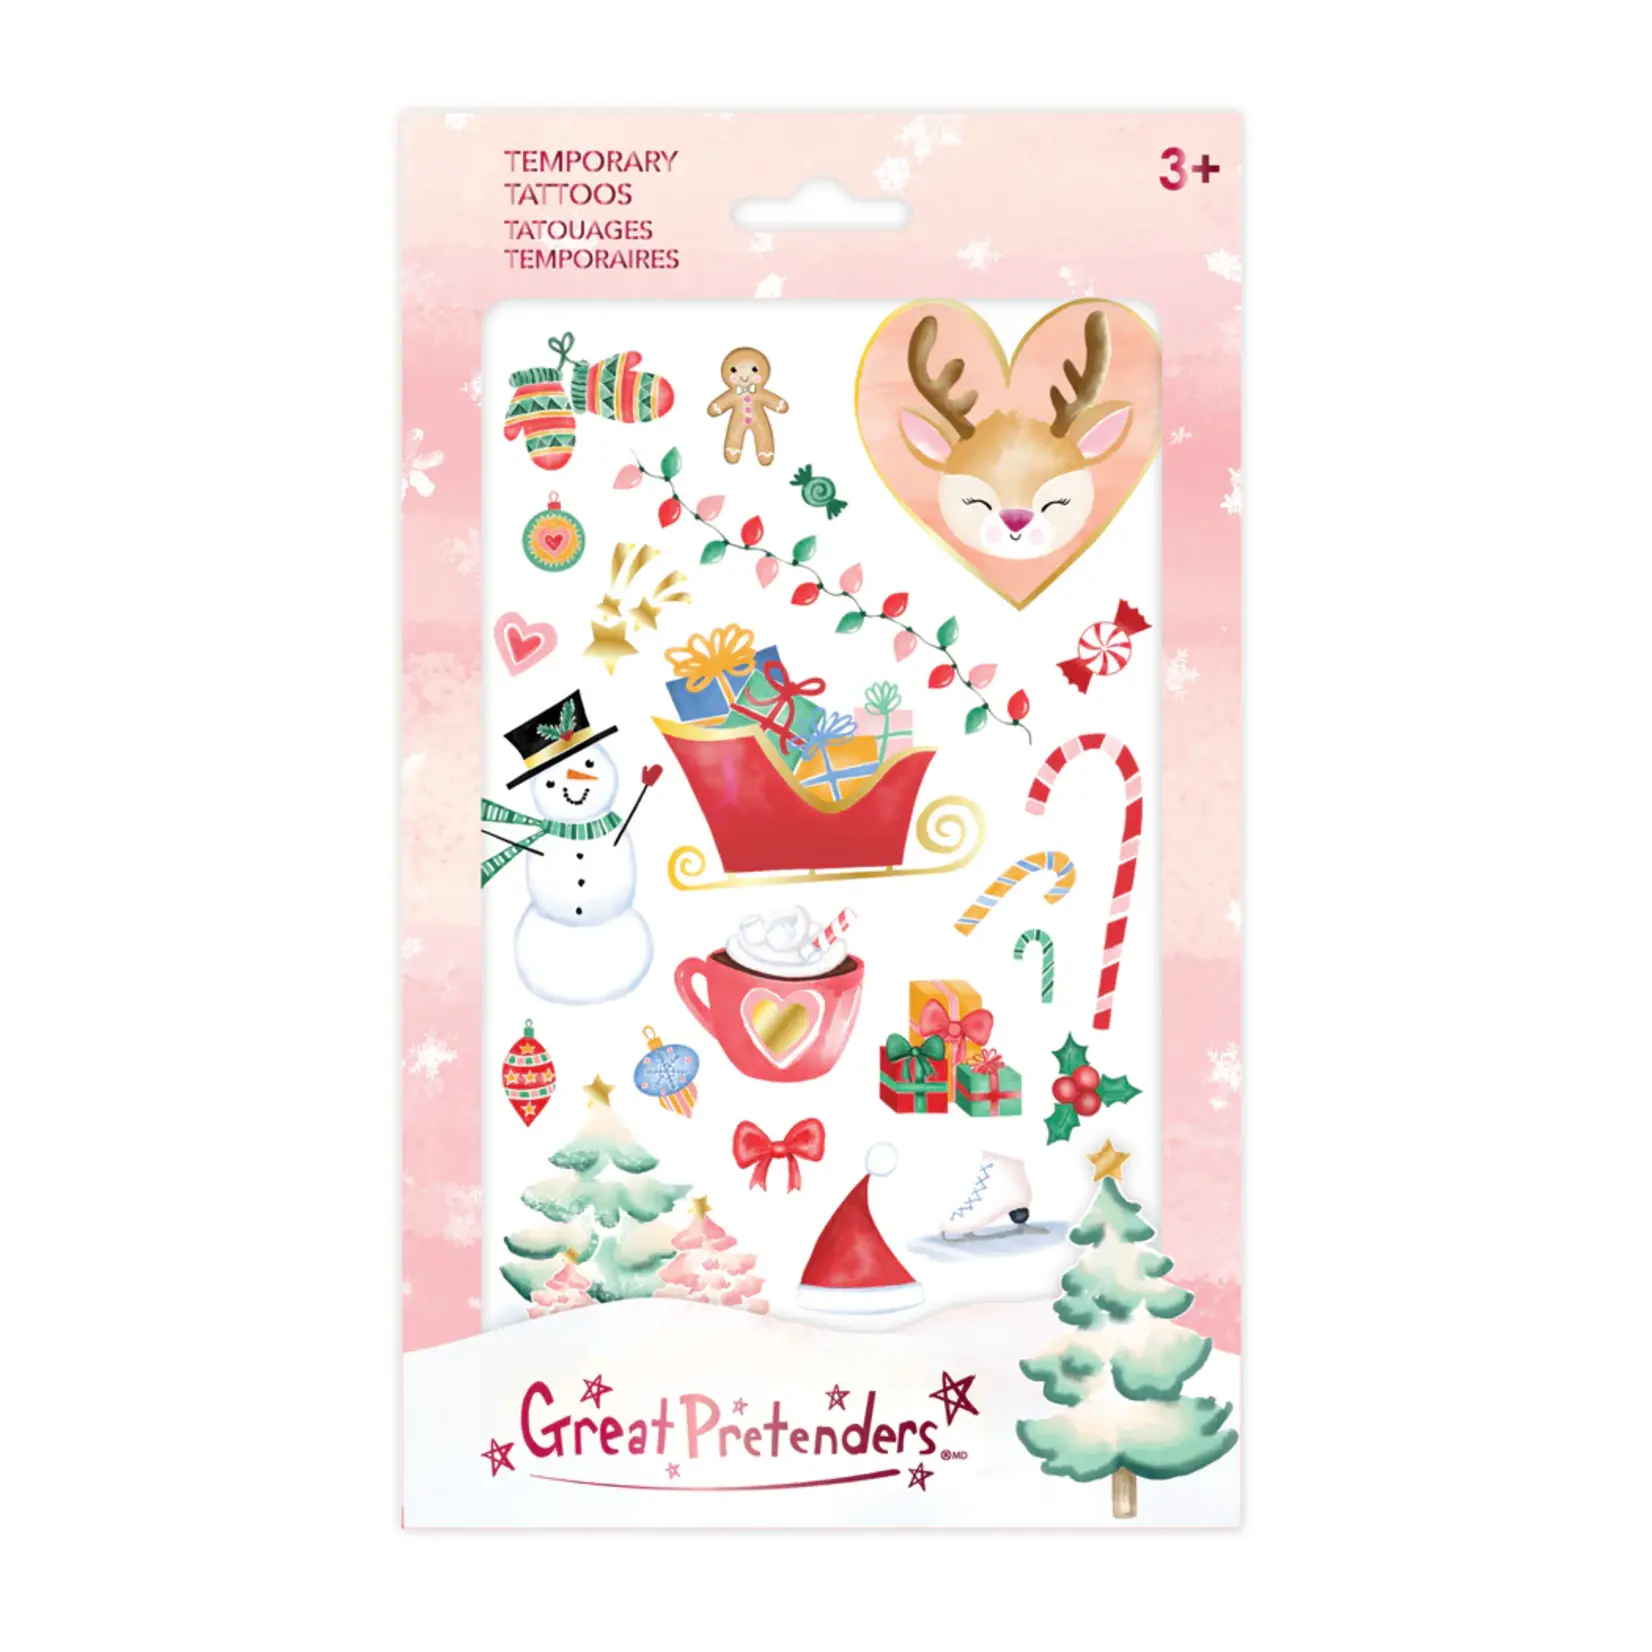 Great Pretenders Holiday Temporary Tattoos